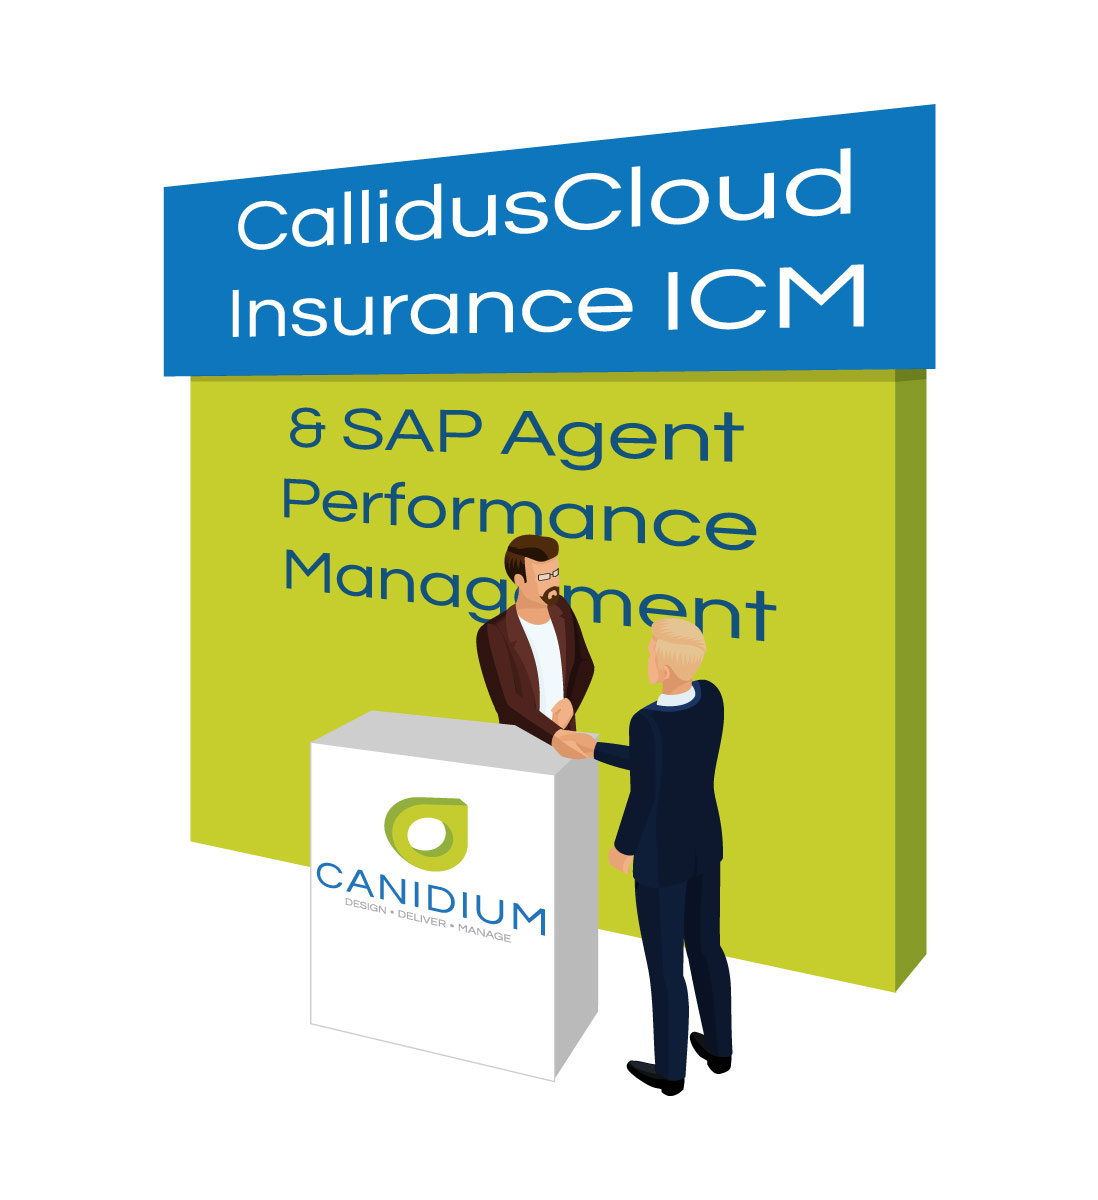 The Number One Partner for CallidusCloud Insurance ICM and SAP Agent Performance Management